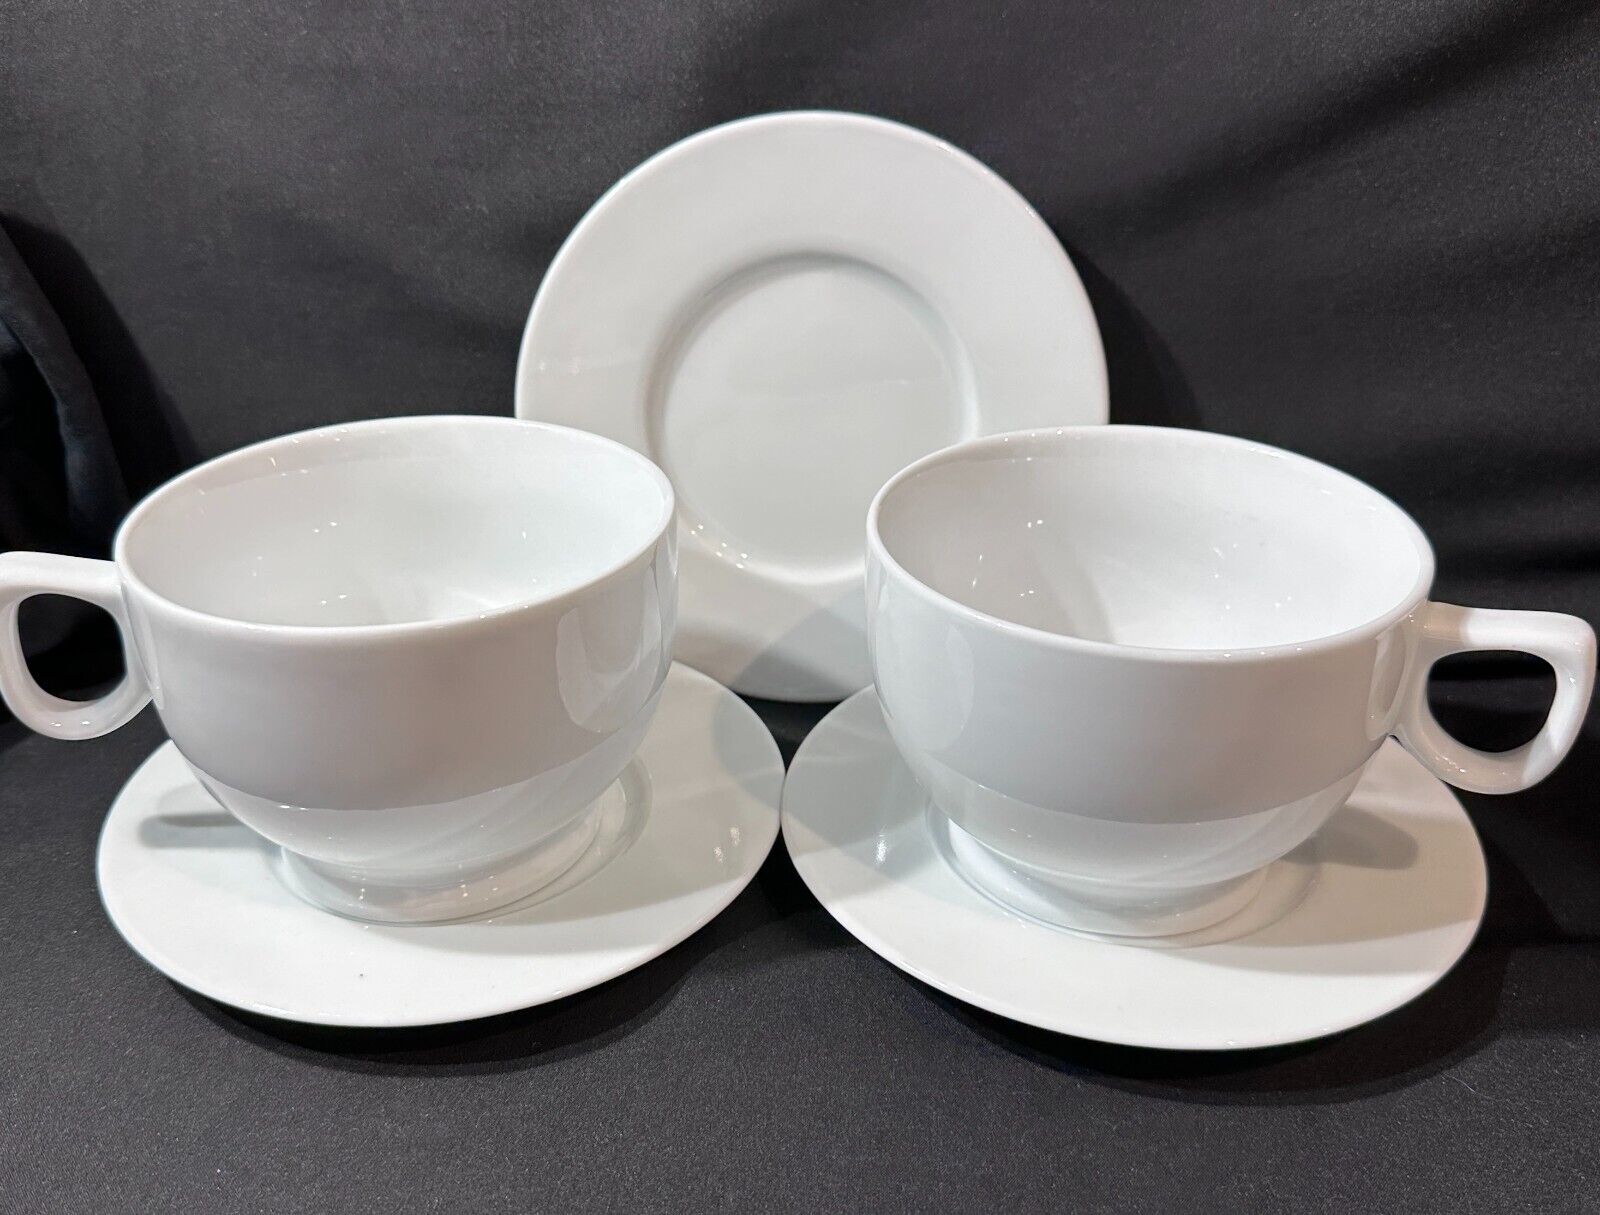 2 New  BIA Cordon Bleu Footed White Latte Mugs with Saucers